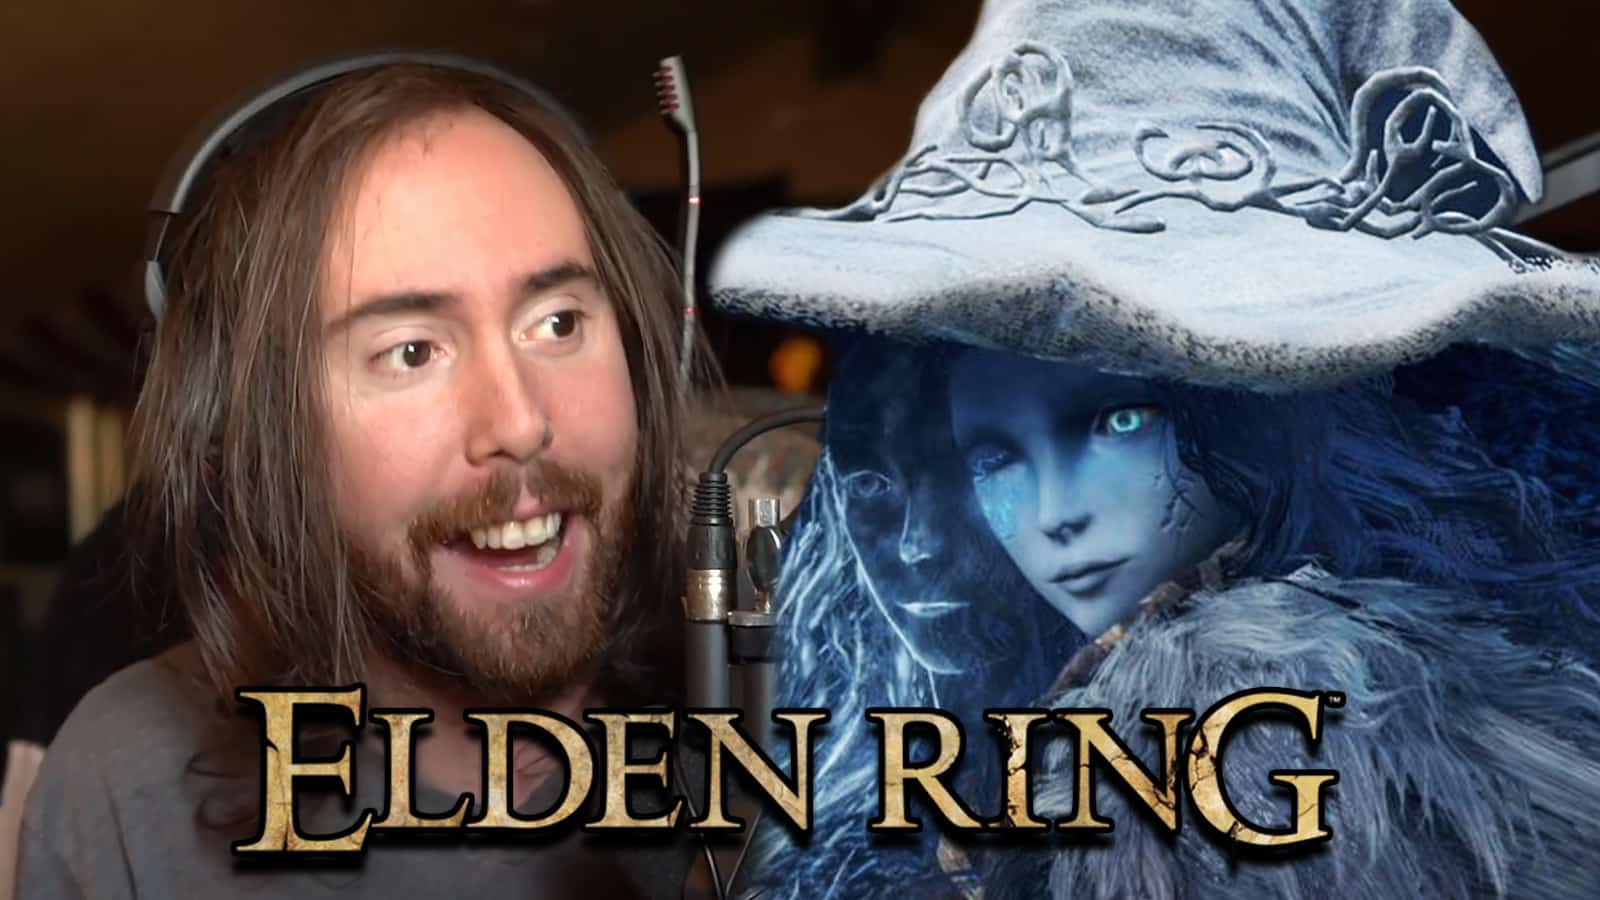 Asmongold explains why Elden Ring is one of the “greatest games